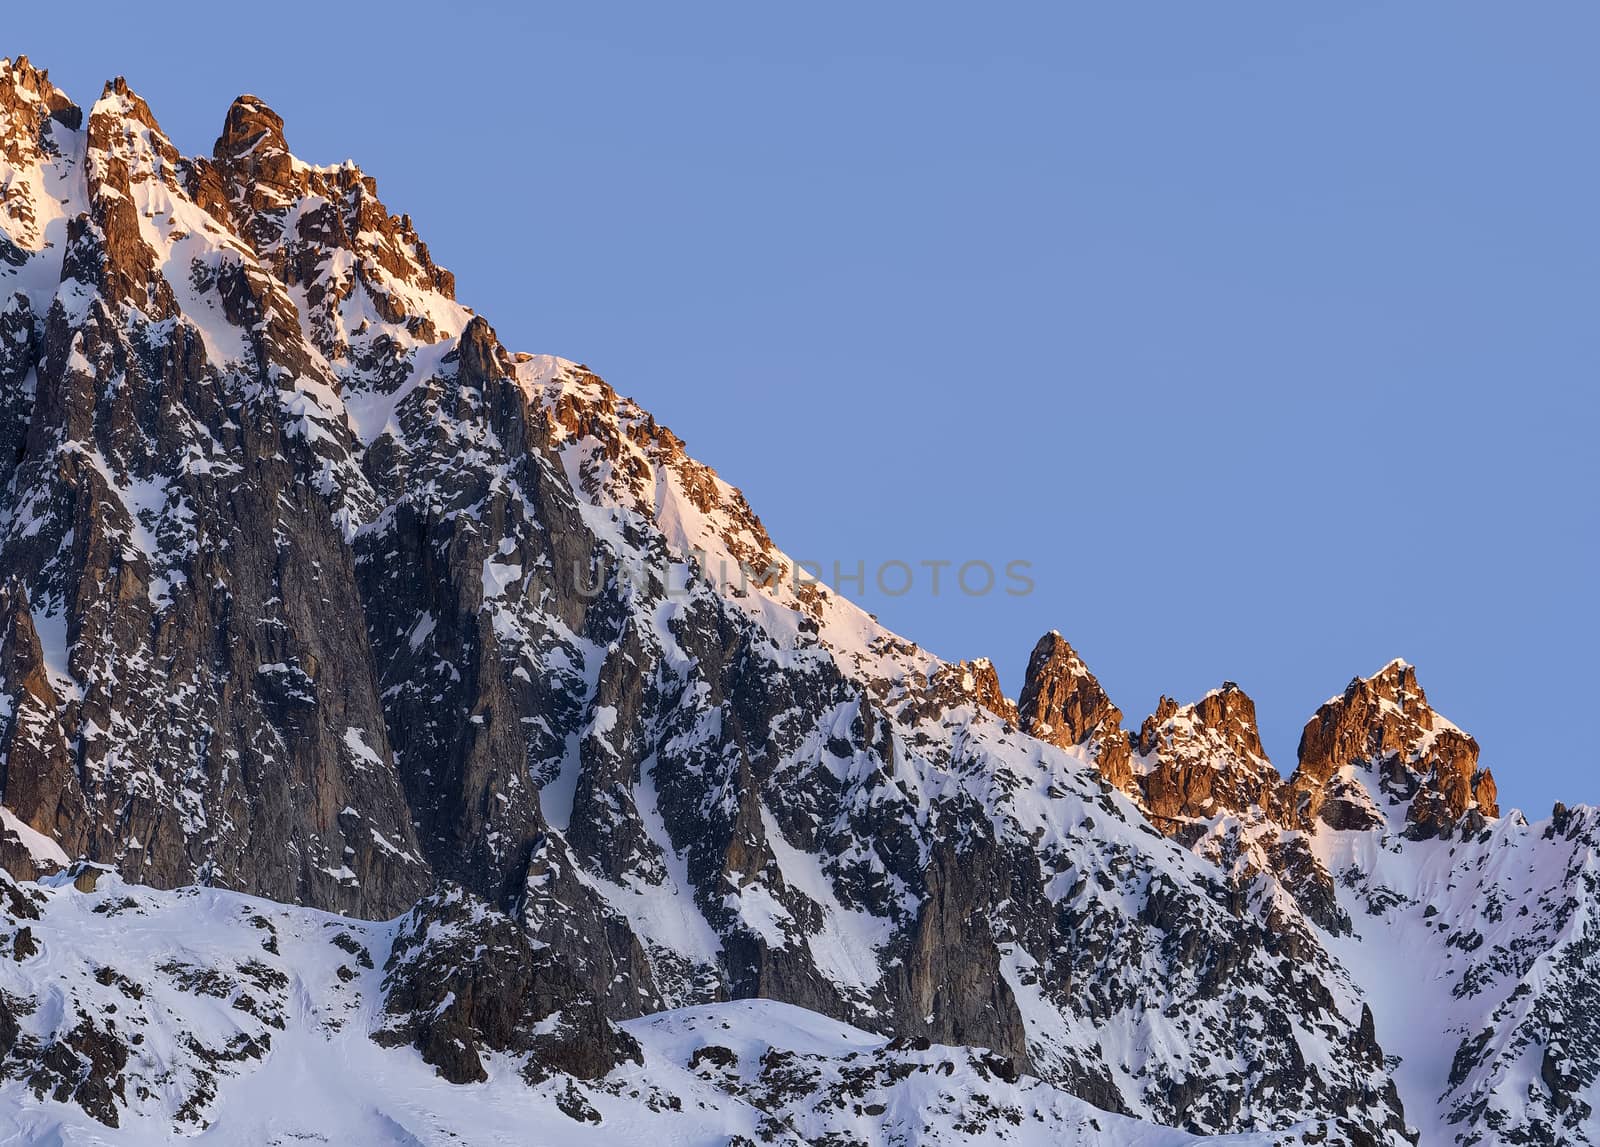 The beautiful snow covered mountains around Passo Tonale in winter, Italy.